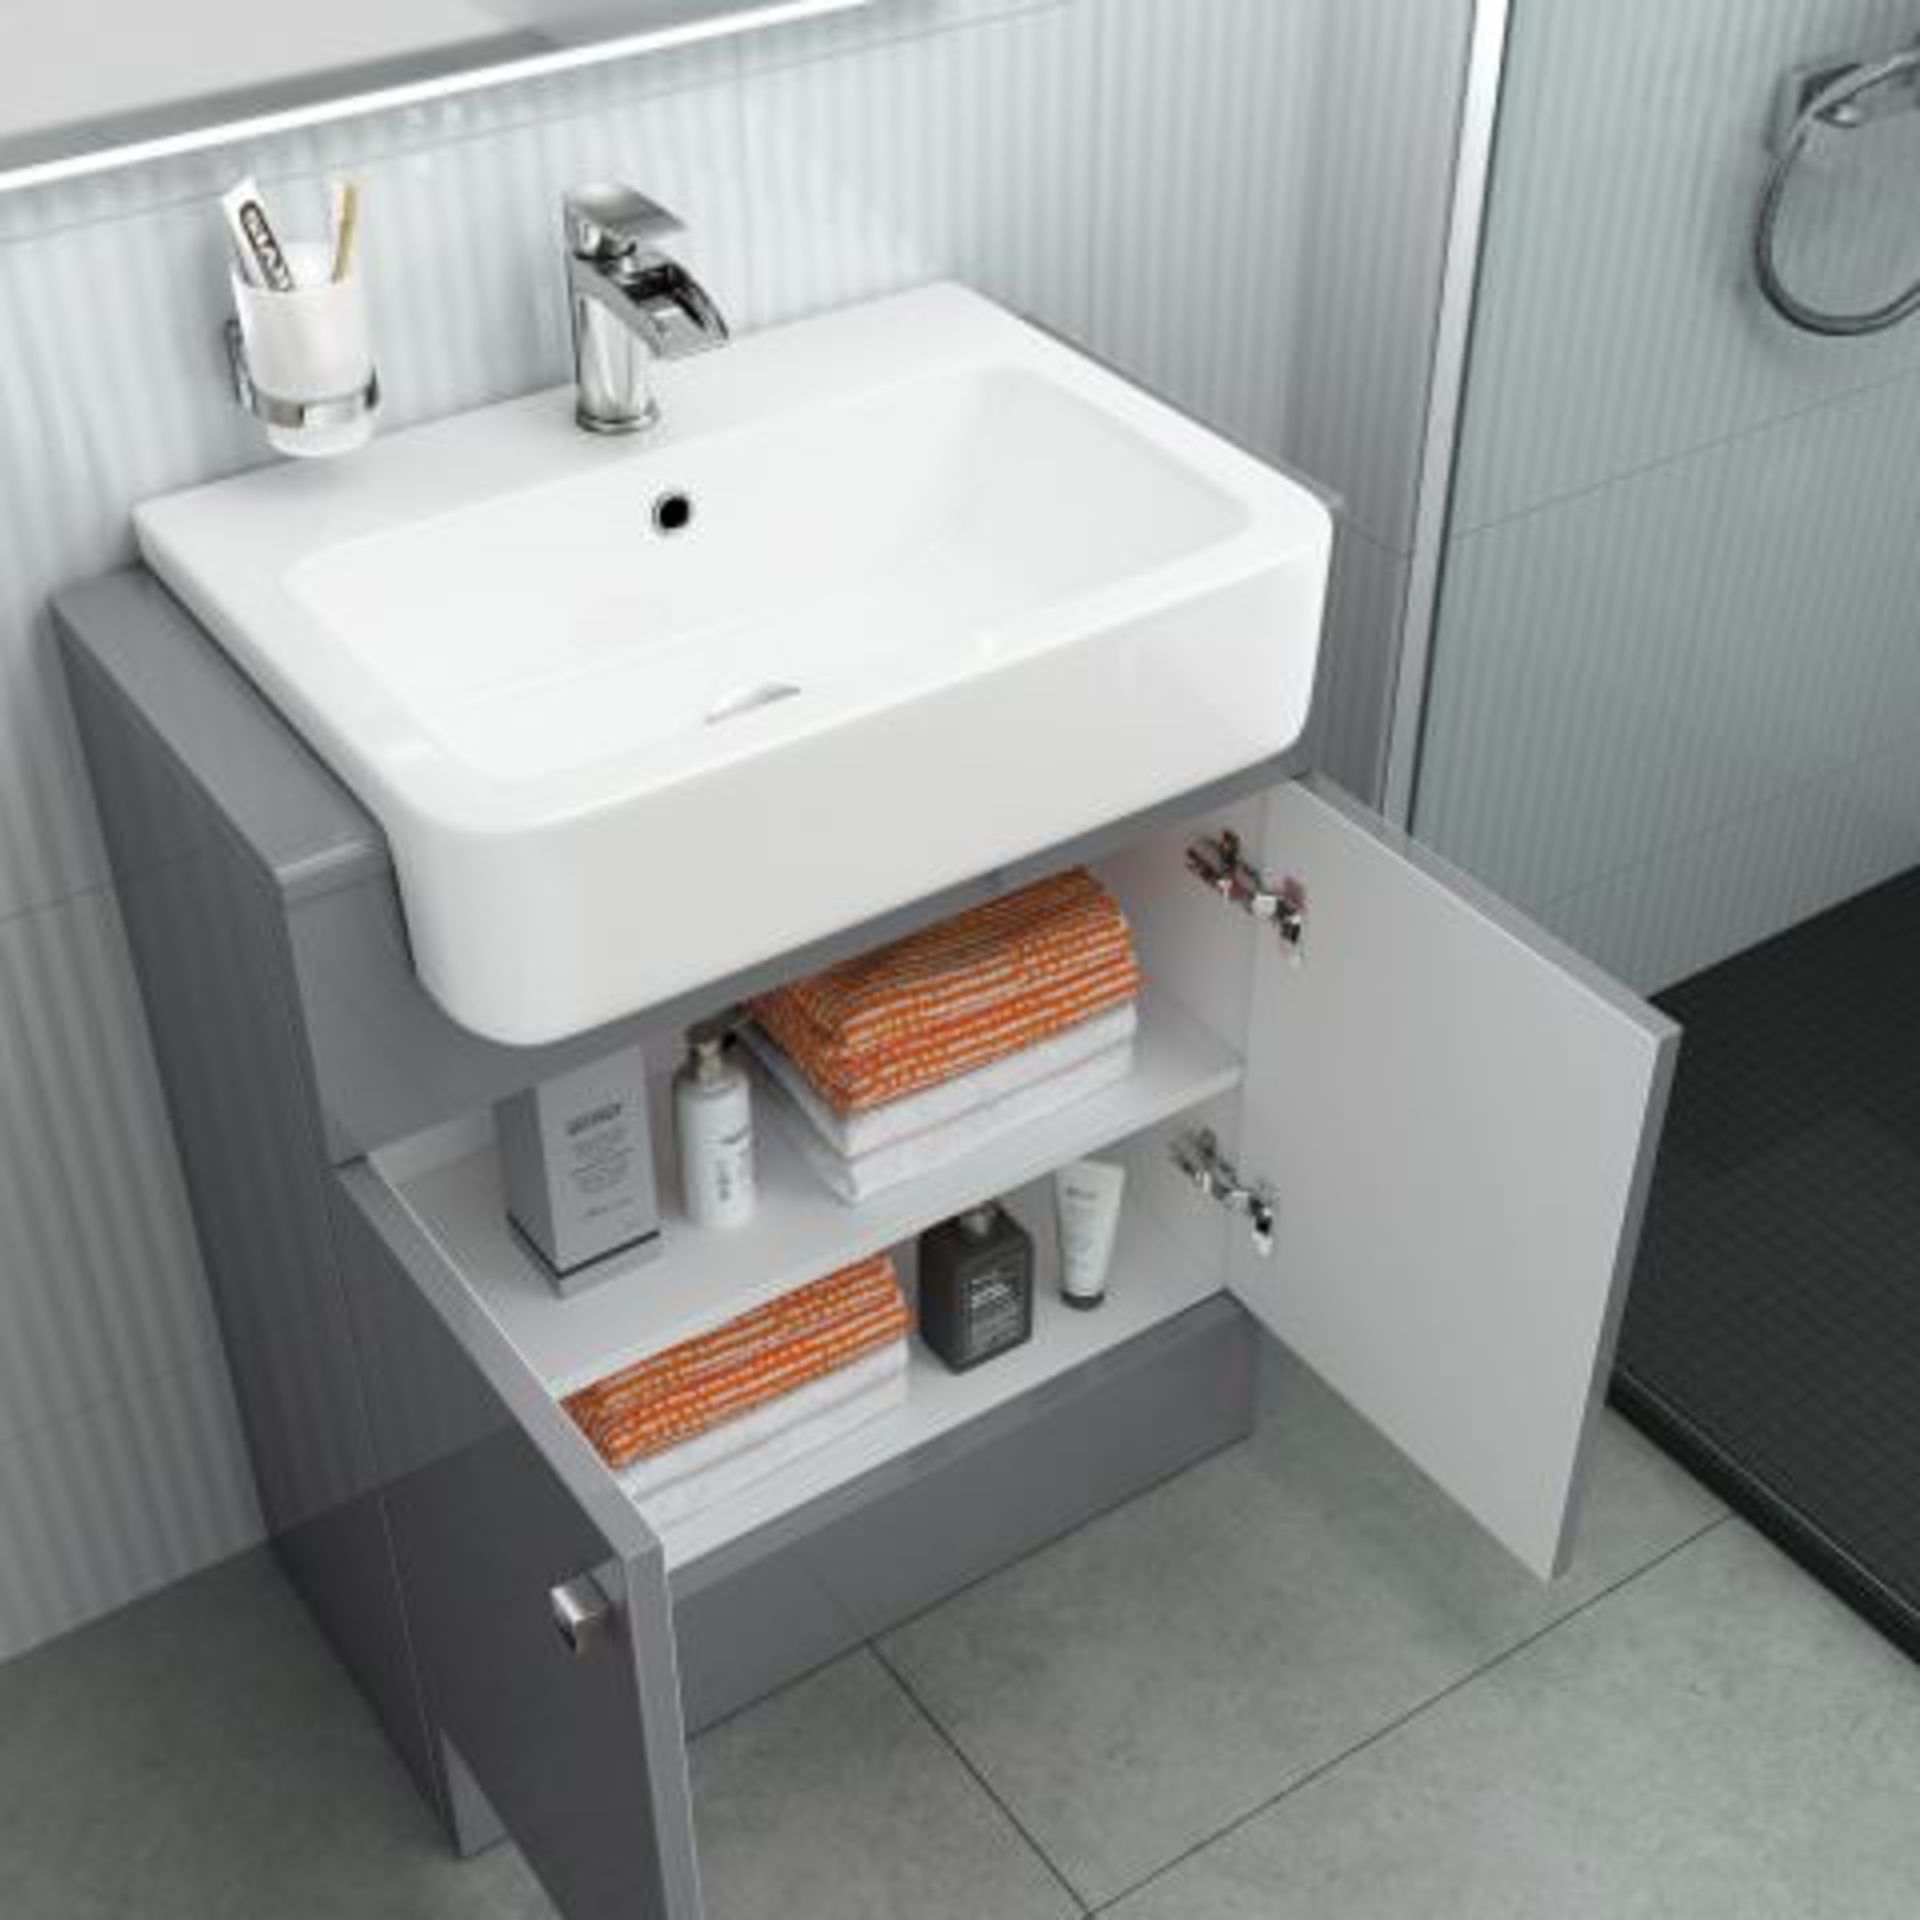 660mm Harper Gloss Grey Basin Vanity Unit - Floor Standing. RRP £749.99. COMES COMPLETE WITH B... - Image 3 of 3